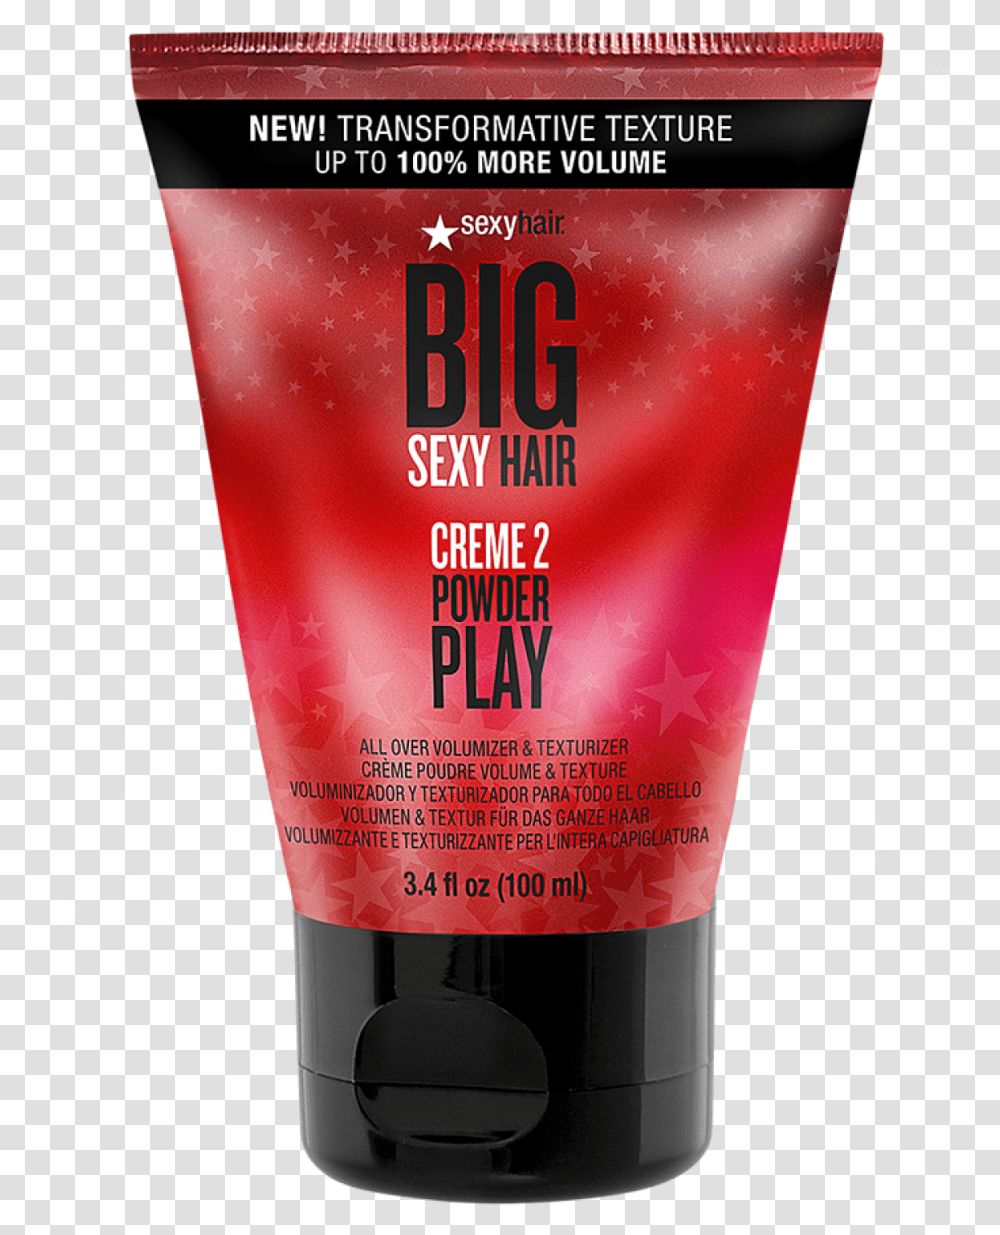 Big Sexy Hair Creme 2 Powder Play, Cosmetics, Bottle, Aftershave, Advertisement Transparent Png